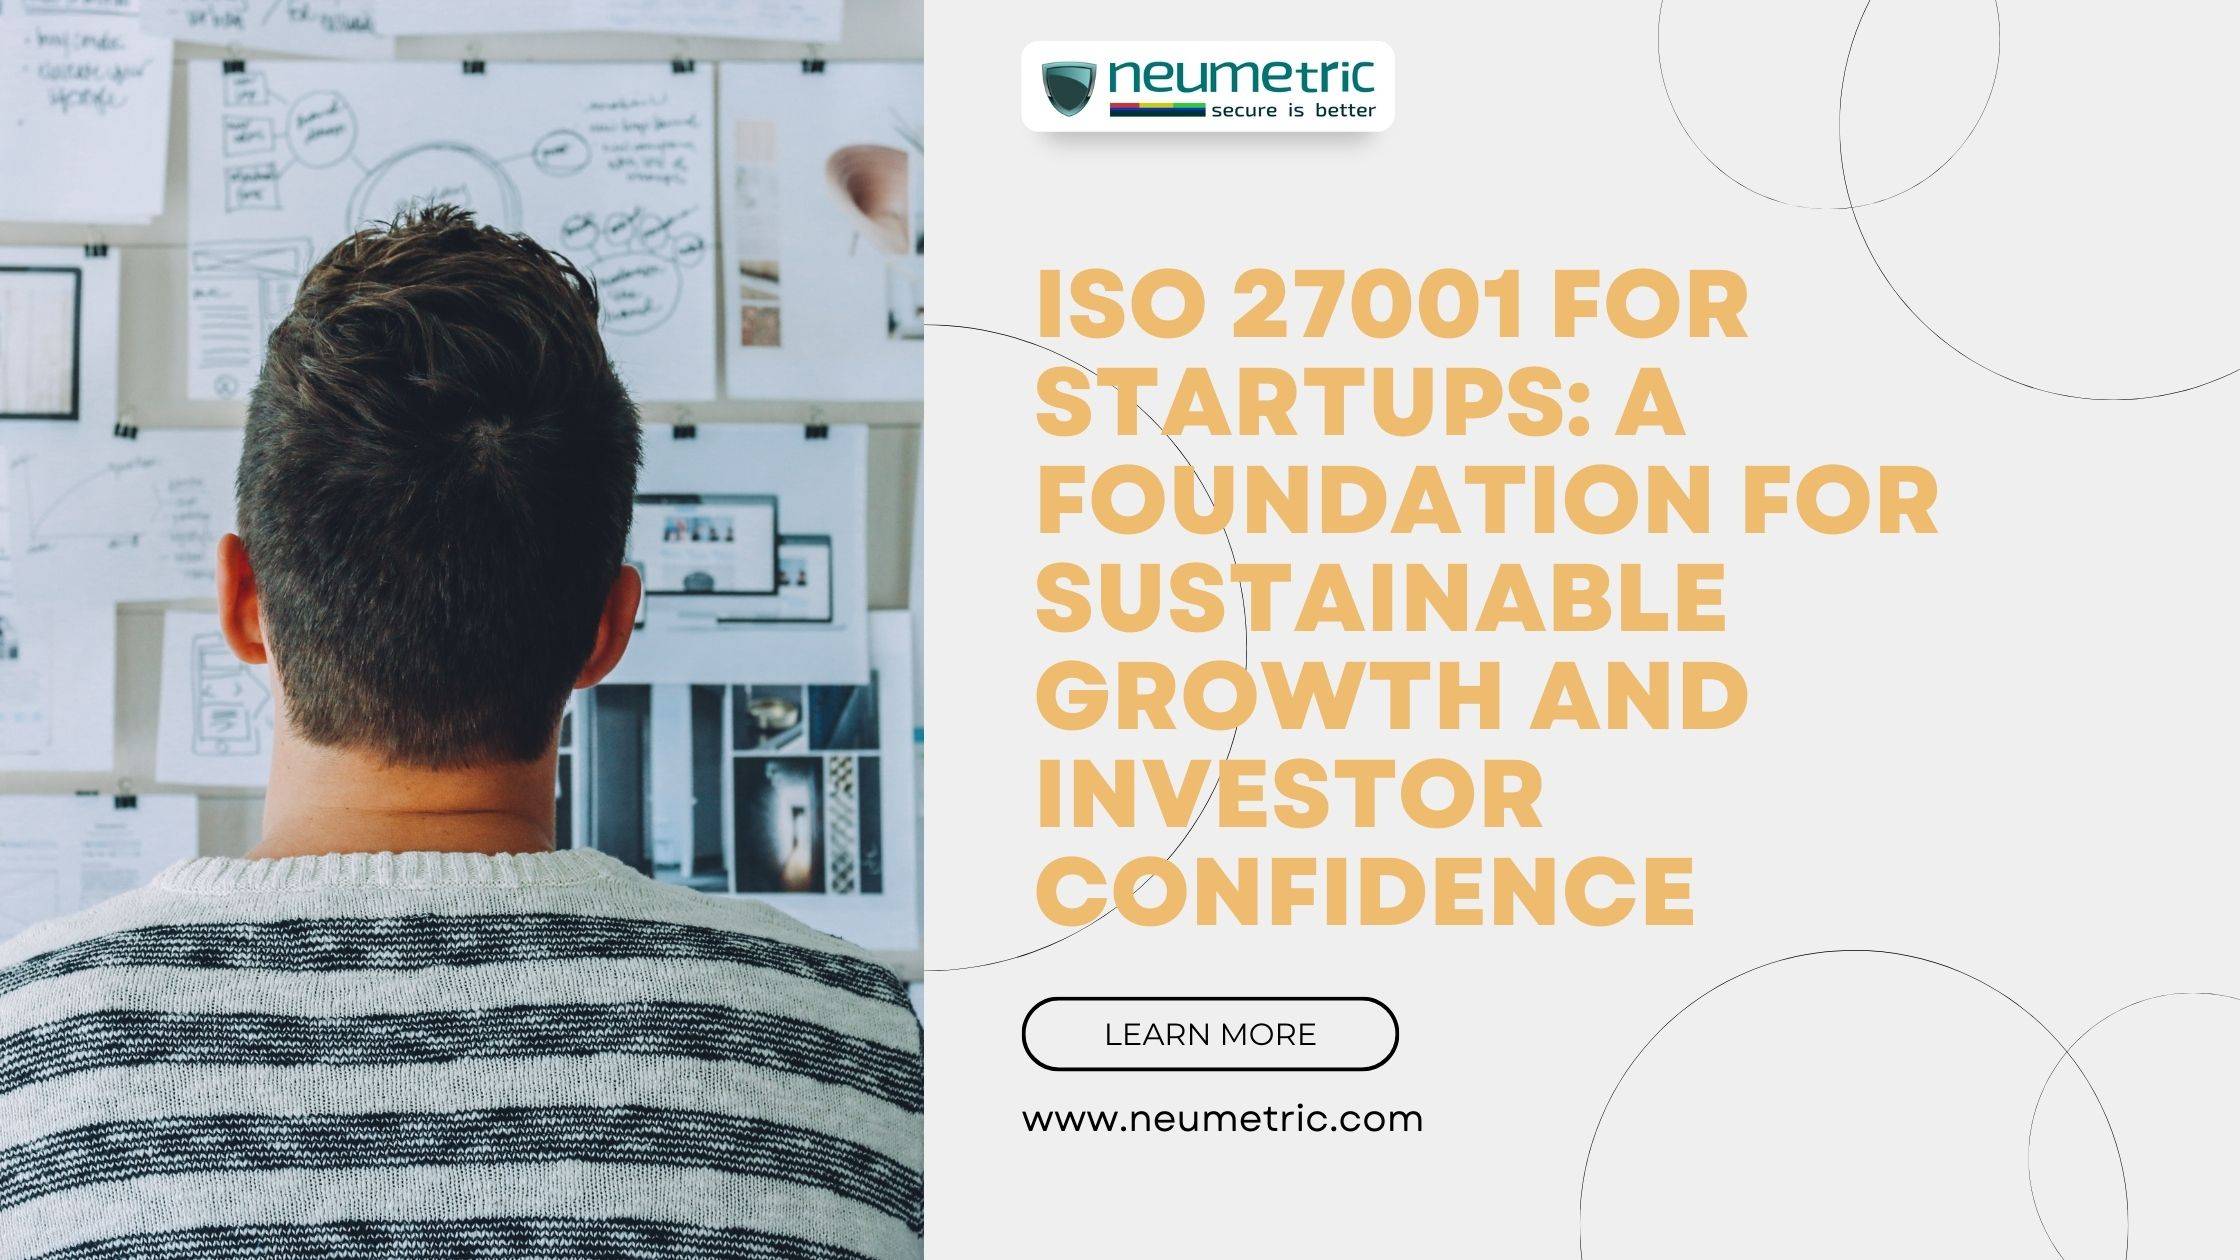 ISO 27001 for Startups: A Foundation for Sustainable Growth & Investor Confidence